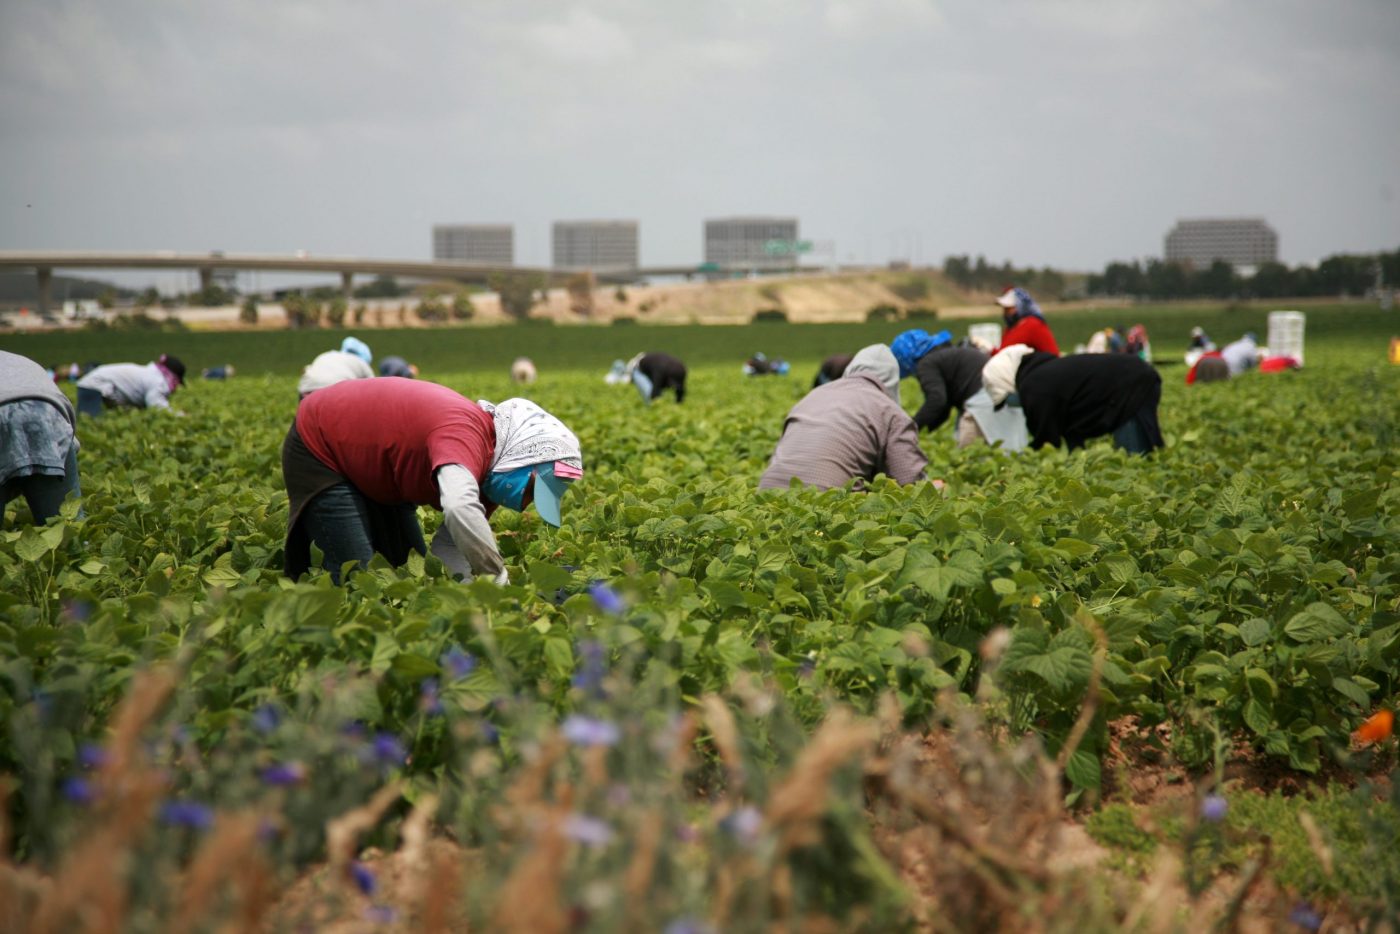 Vertical explainer photo 2 - Workers pick green beans in a field.